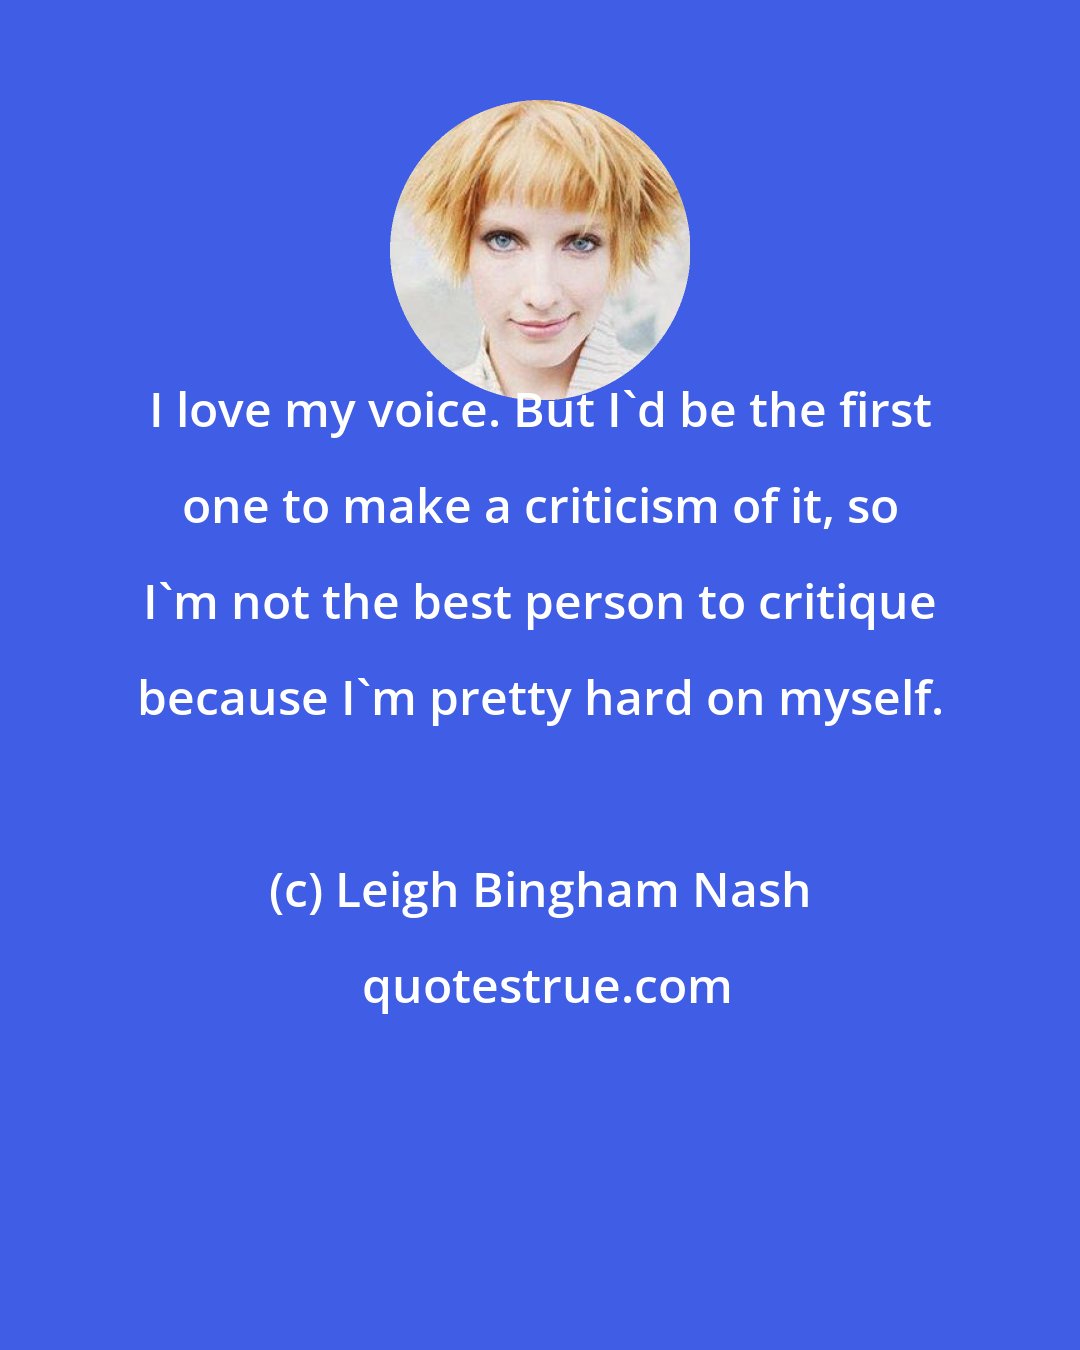 Leigh Bingham Nash: I love my voice. But I'd be the first one to make a criticism of it, so I'm not the best person to critique because I'm pretty hard on myself.